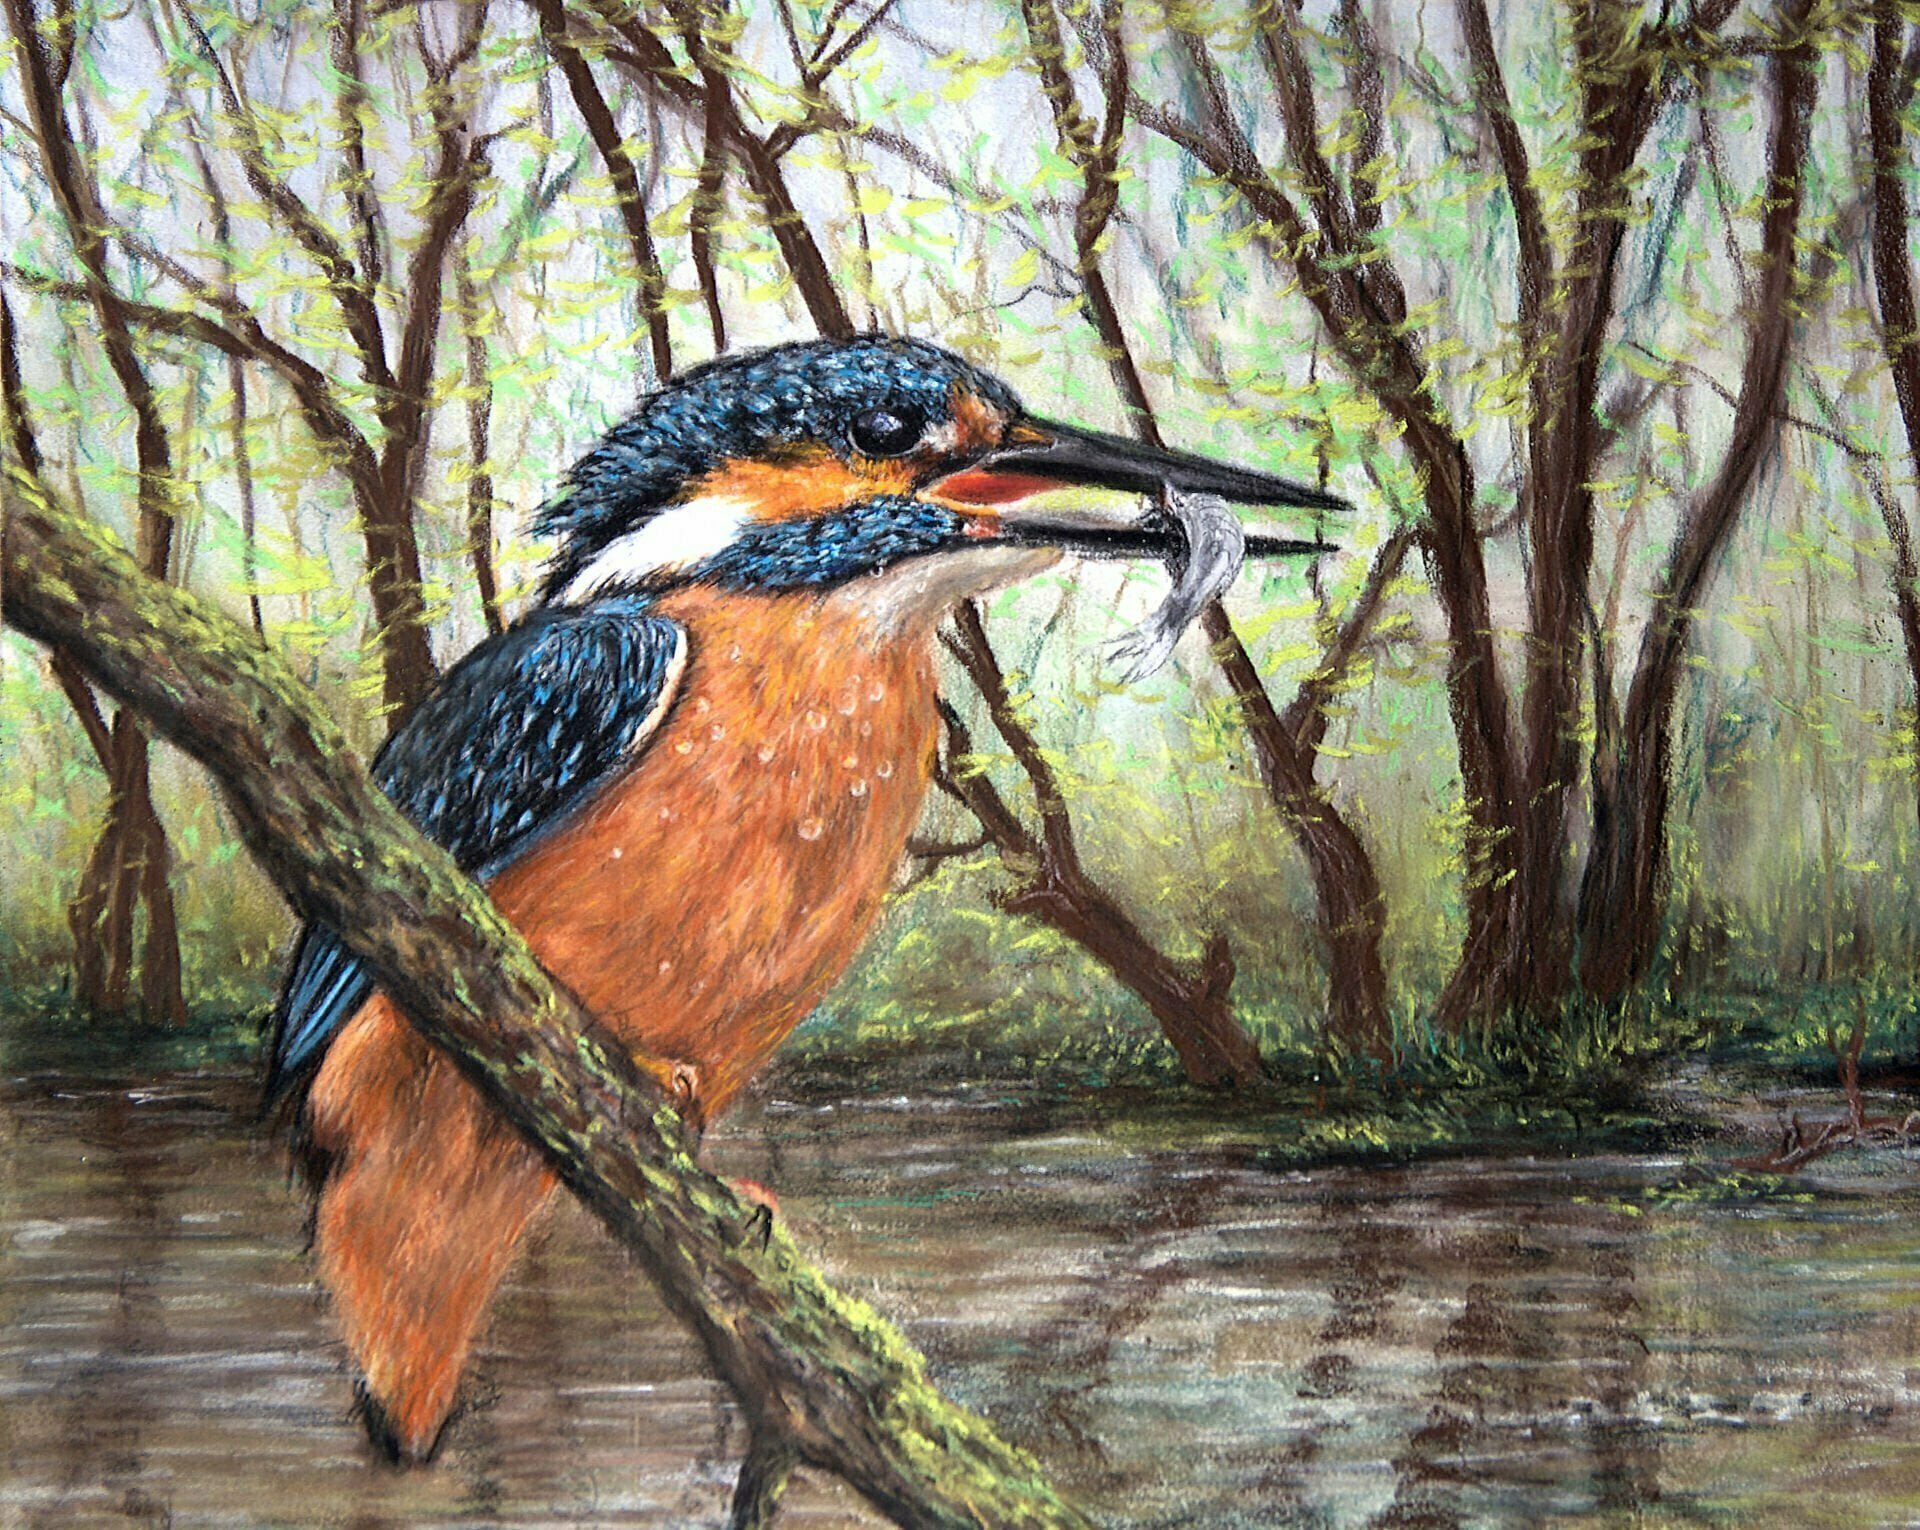 Soft pastel painting of a kingfisher with a fish in its beak